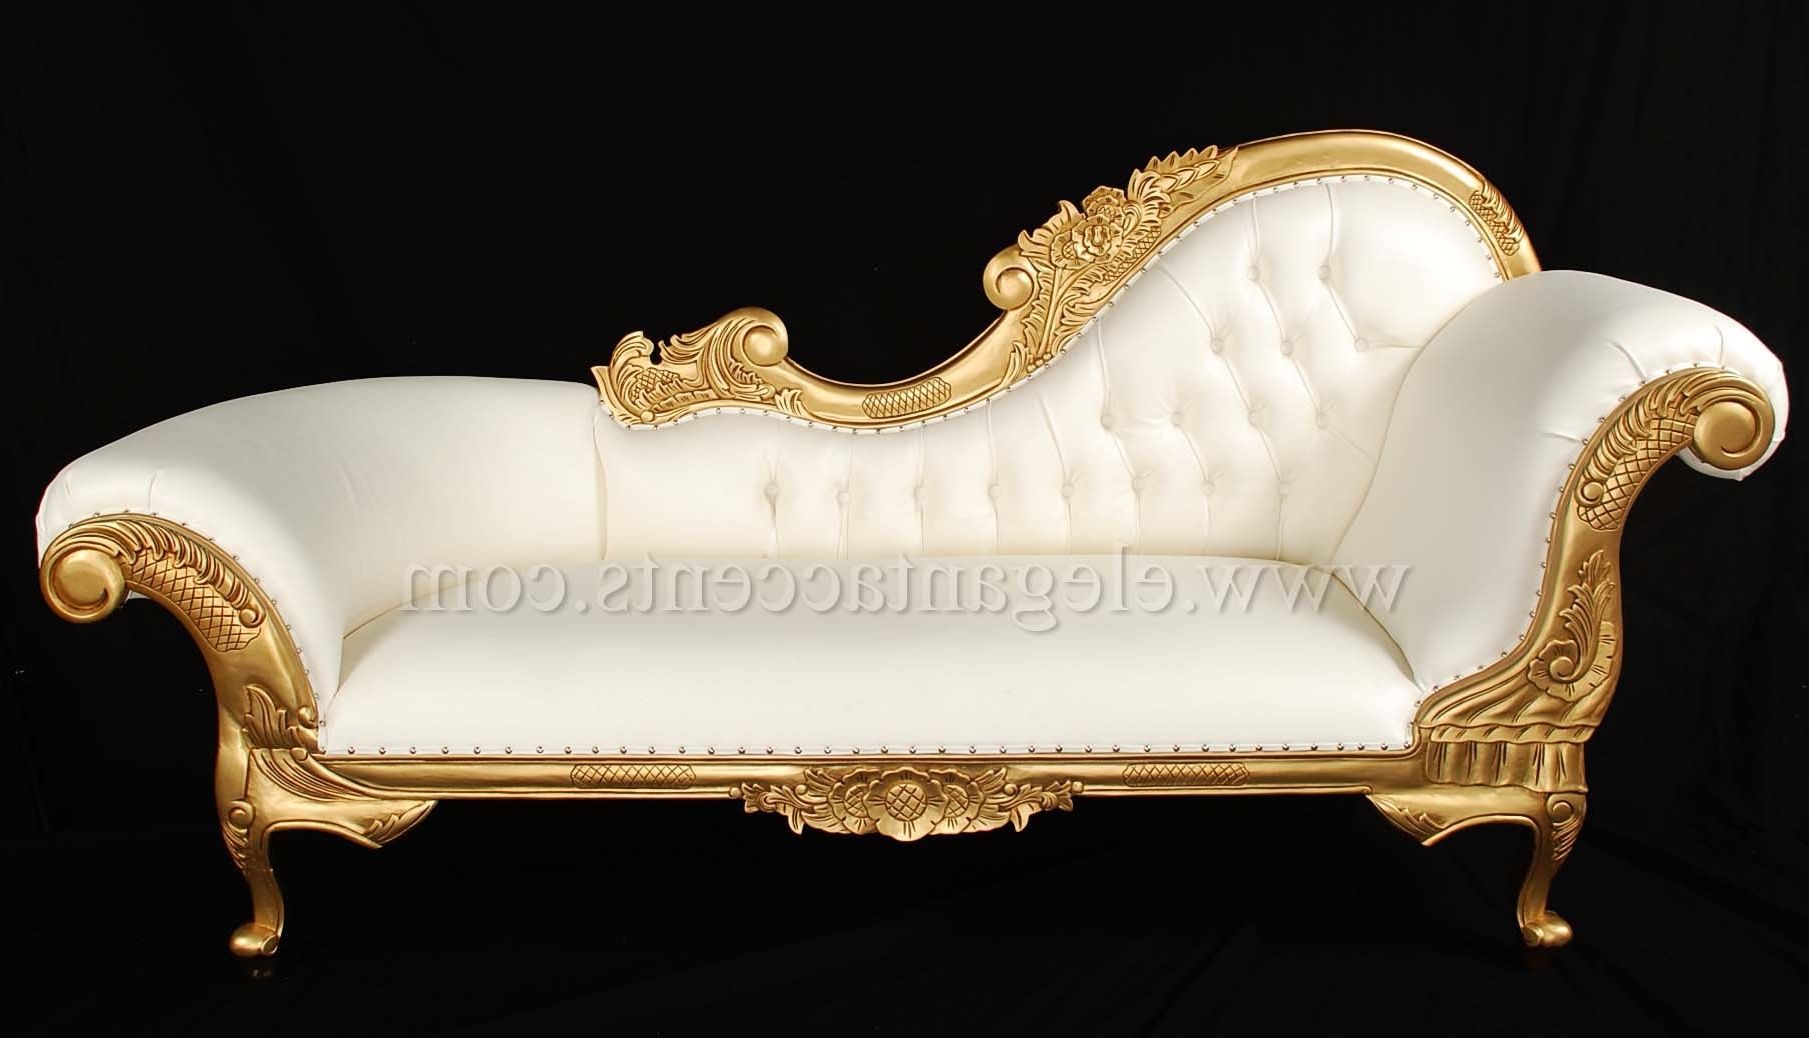 Fashionable This Truly Sumptuous "hood" Chaise Lounge, With Stylized Carving Intended For Gold Chaise Lounge Chairs (View 8 of 15)